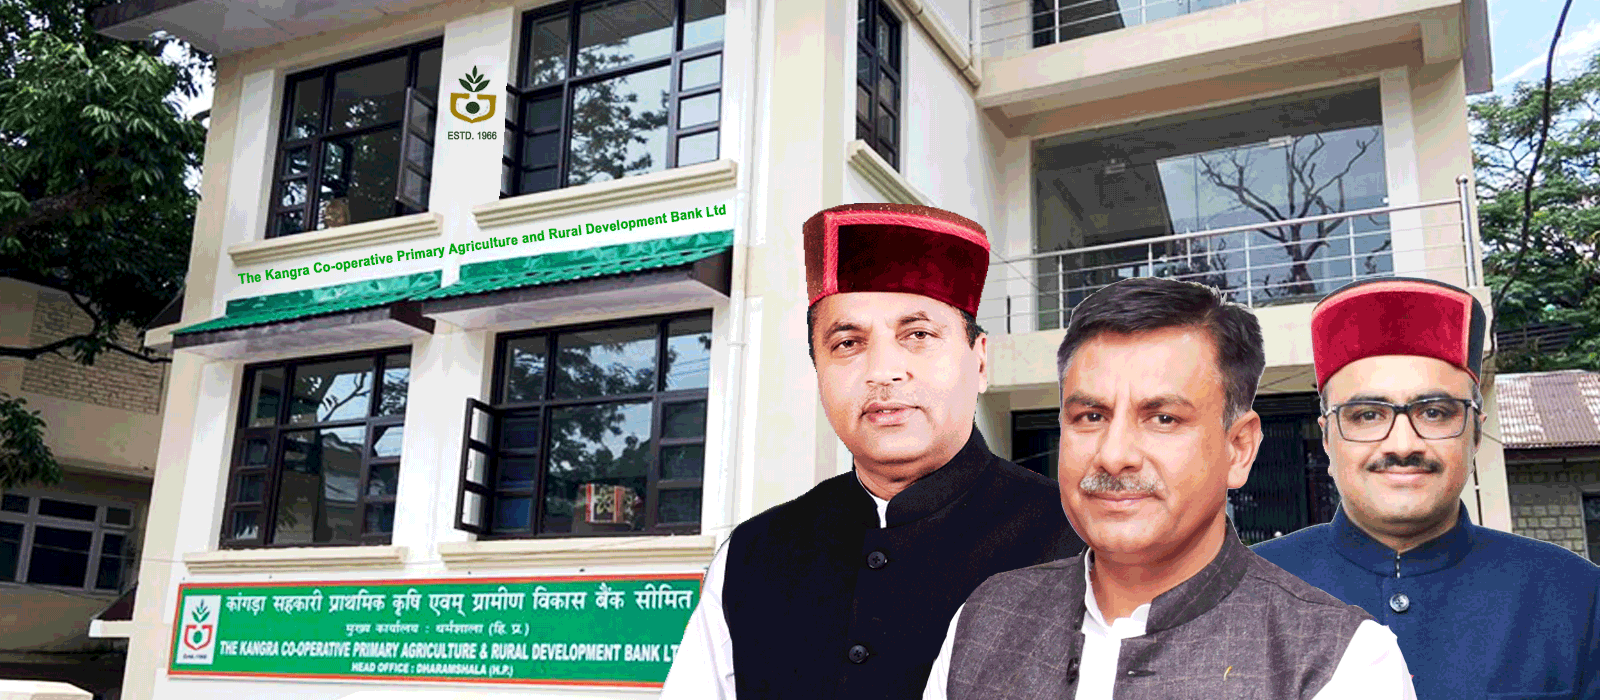 The Kangra Co-operative Primary Agriculture and Rural Development Bank Ltd, Dharamshala